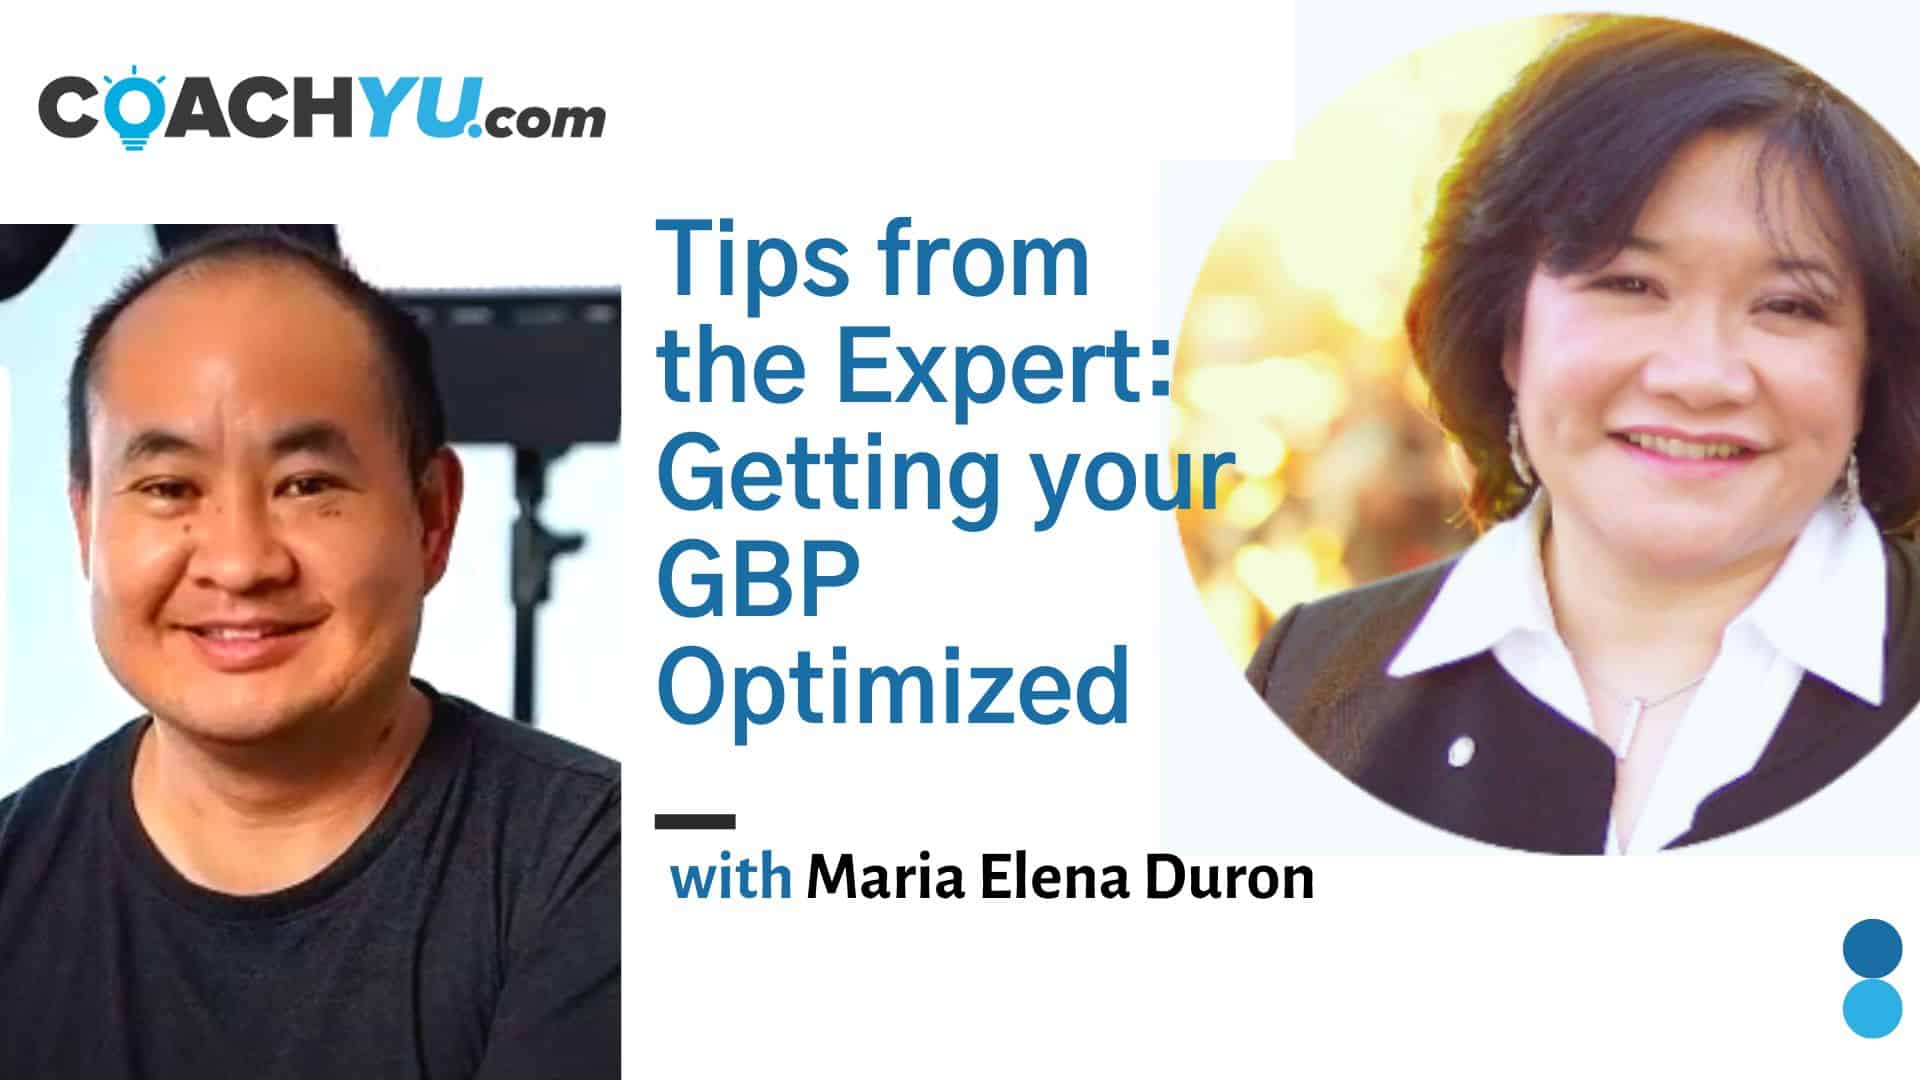 Tips from the Expert: Getting your GBP Optimized with Maria Elena Duron